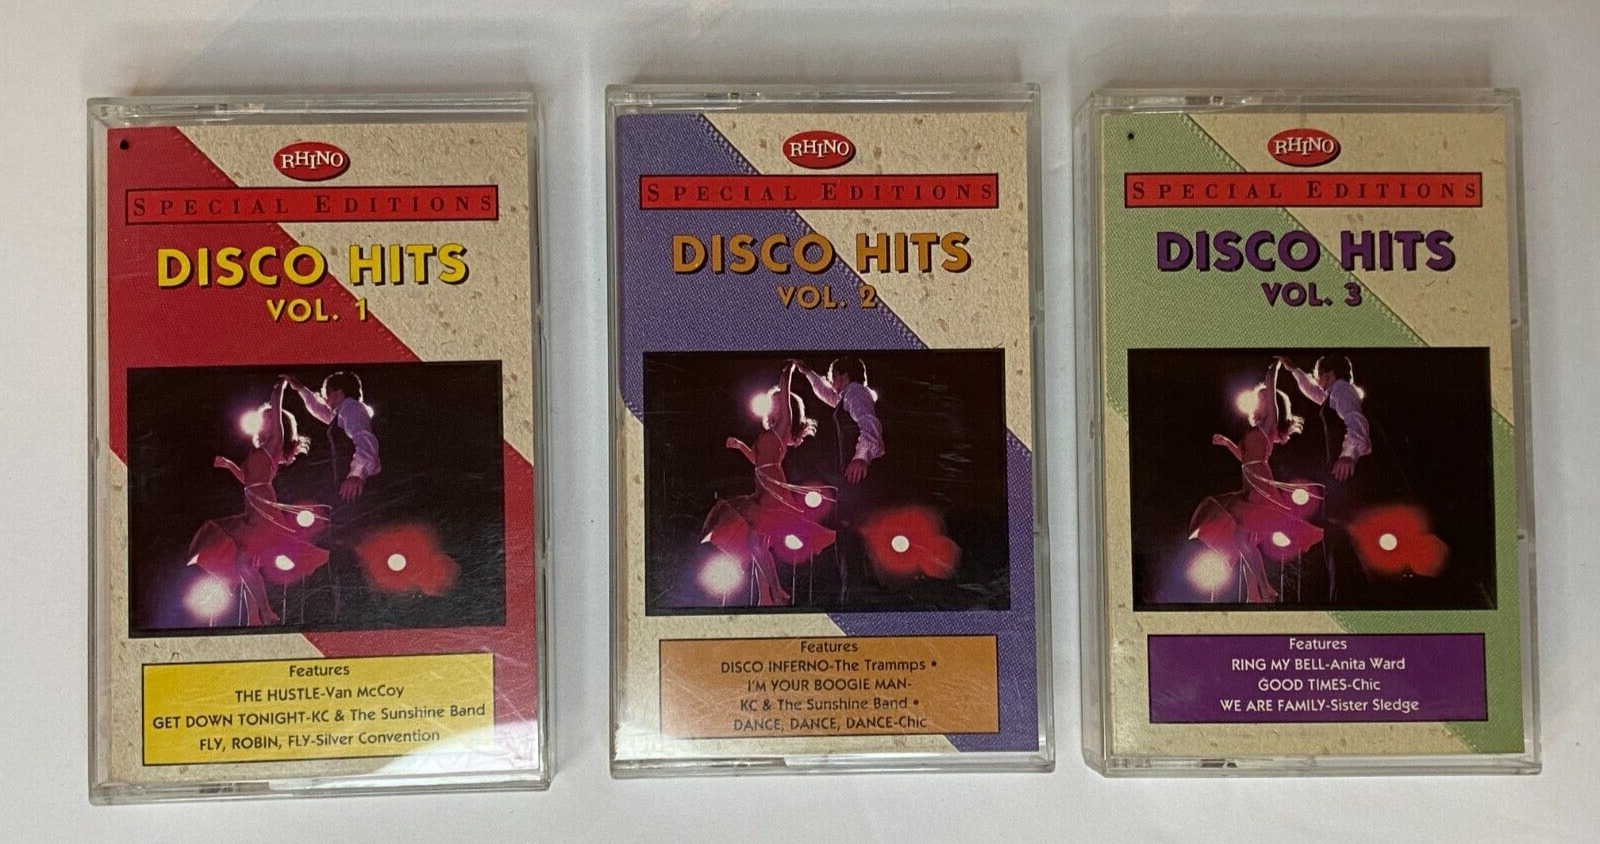 Rhino Special Editions Disco Hits Volumes 1, 2, 3  Cassette Tapes Vintage 1992